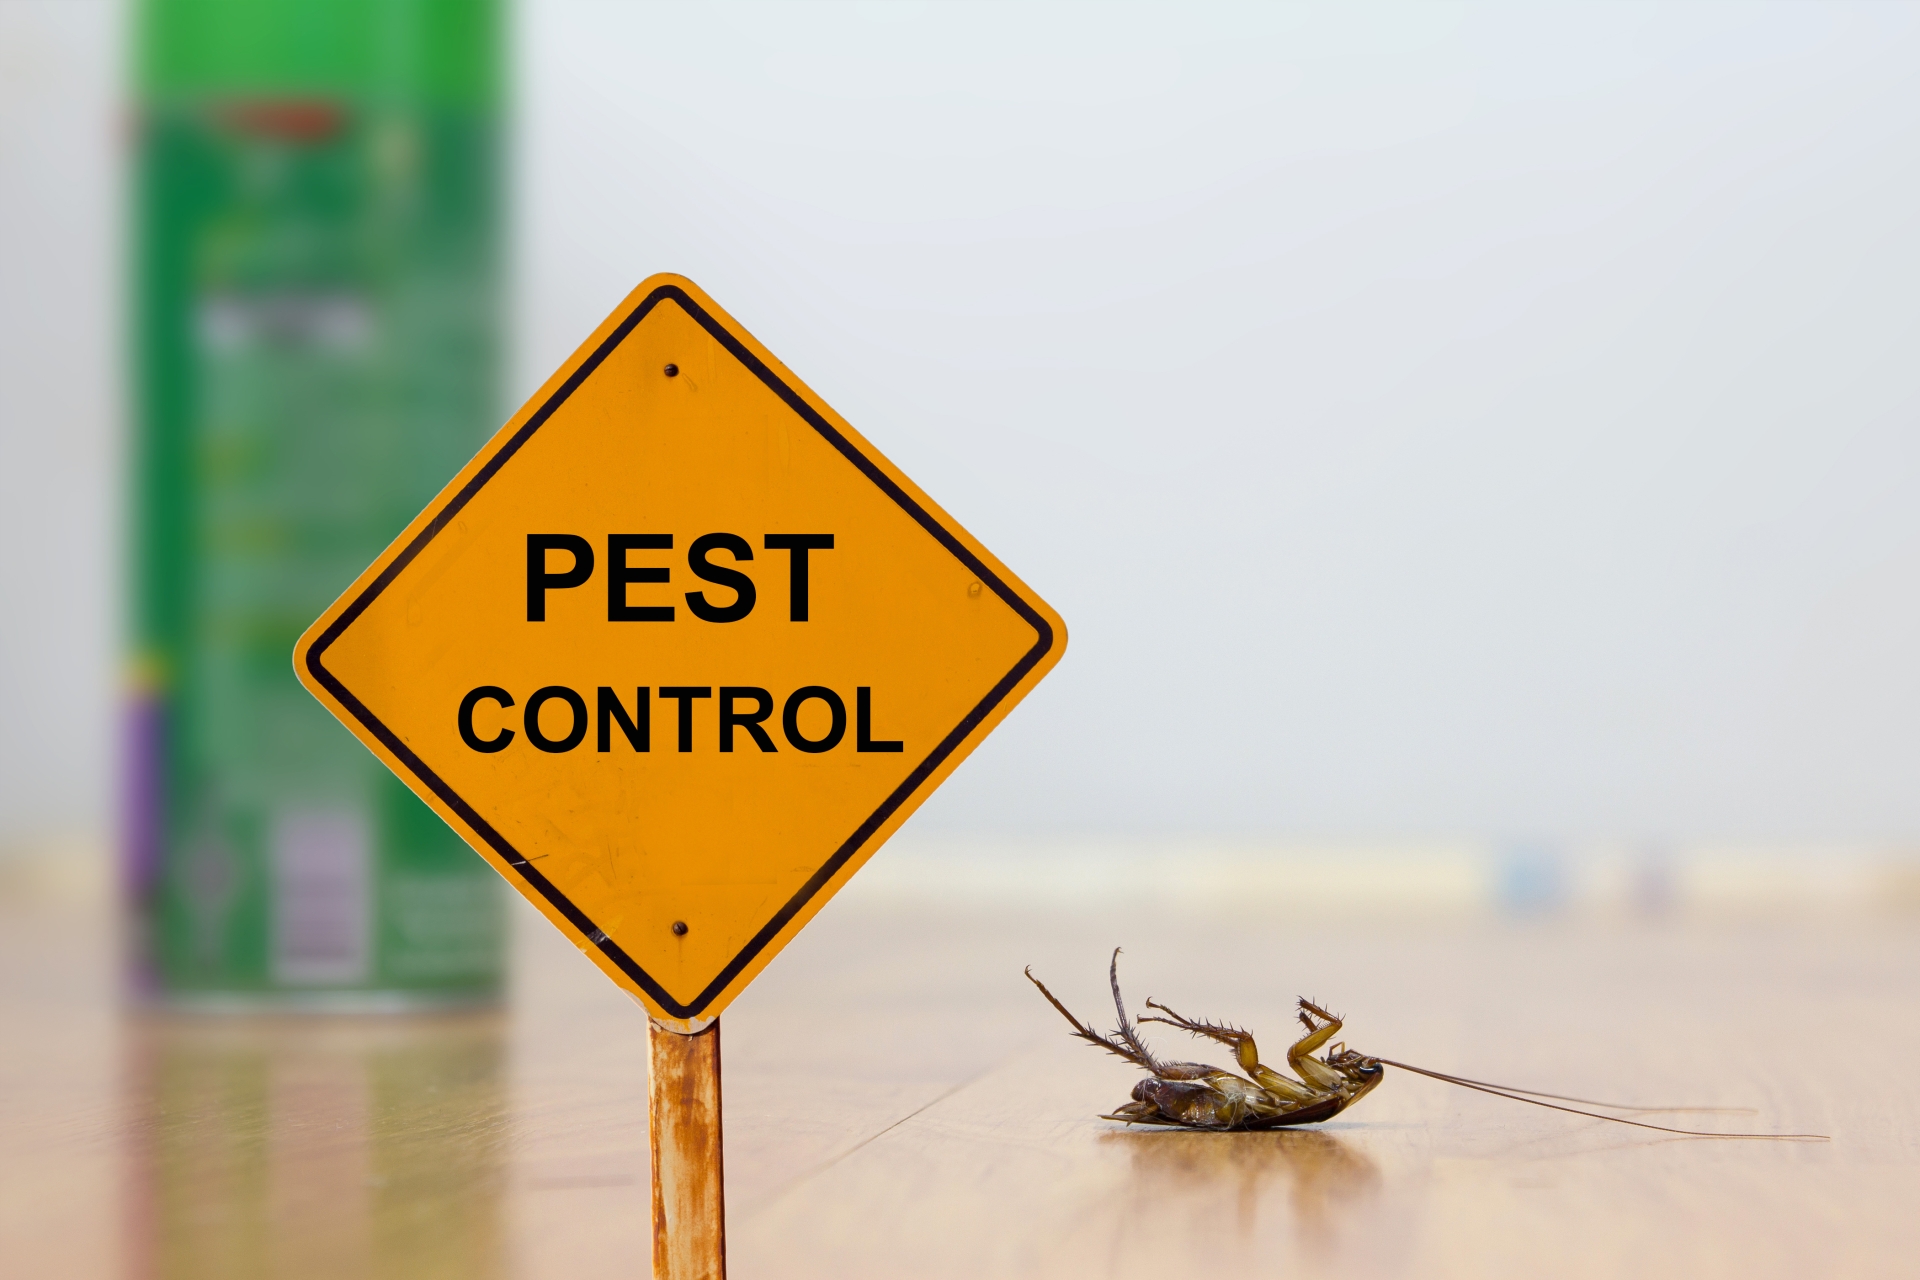 24 Hour Pest Control, Pest Control in Staines-upon-Thames, Egham Hythe, TW18. Call Now 020 8166 9746